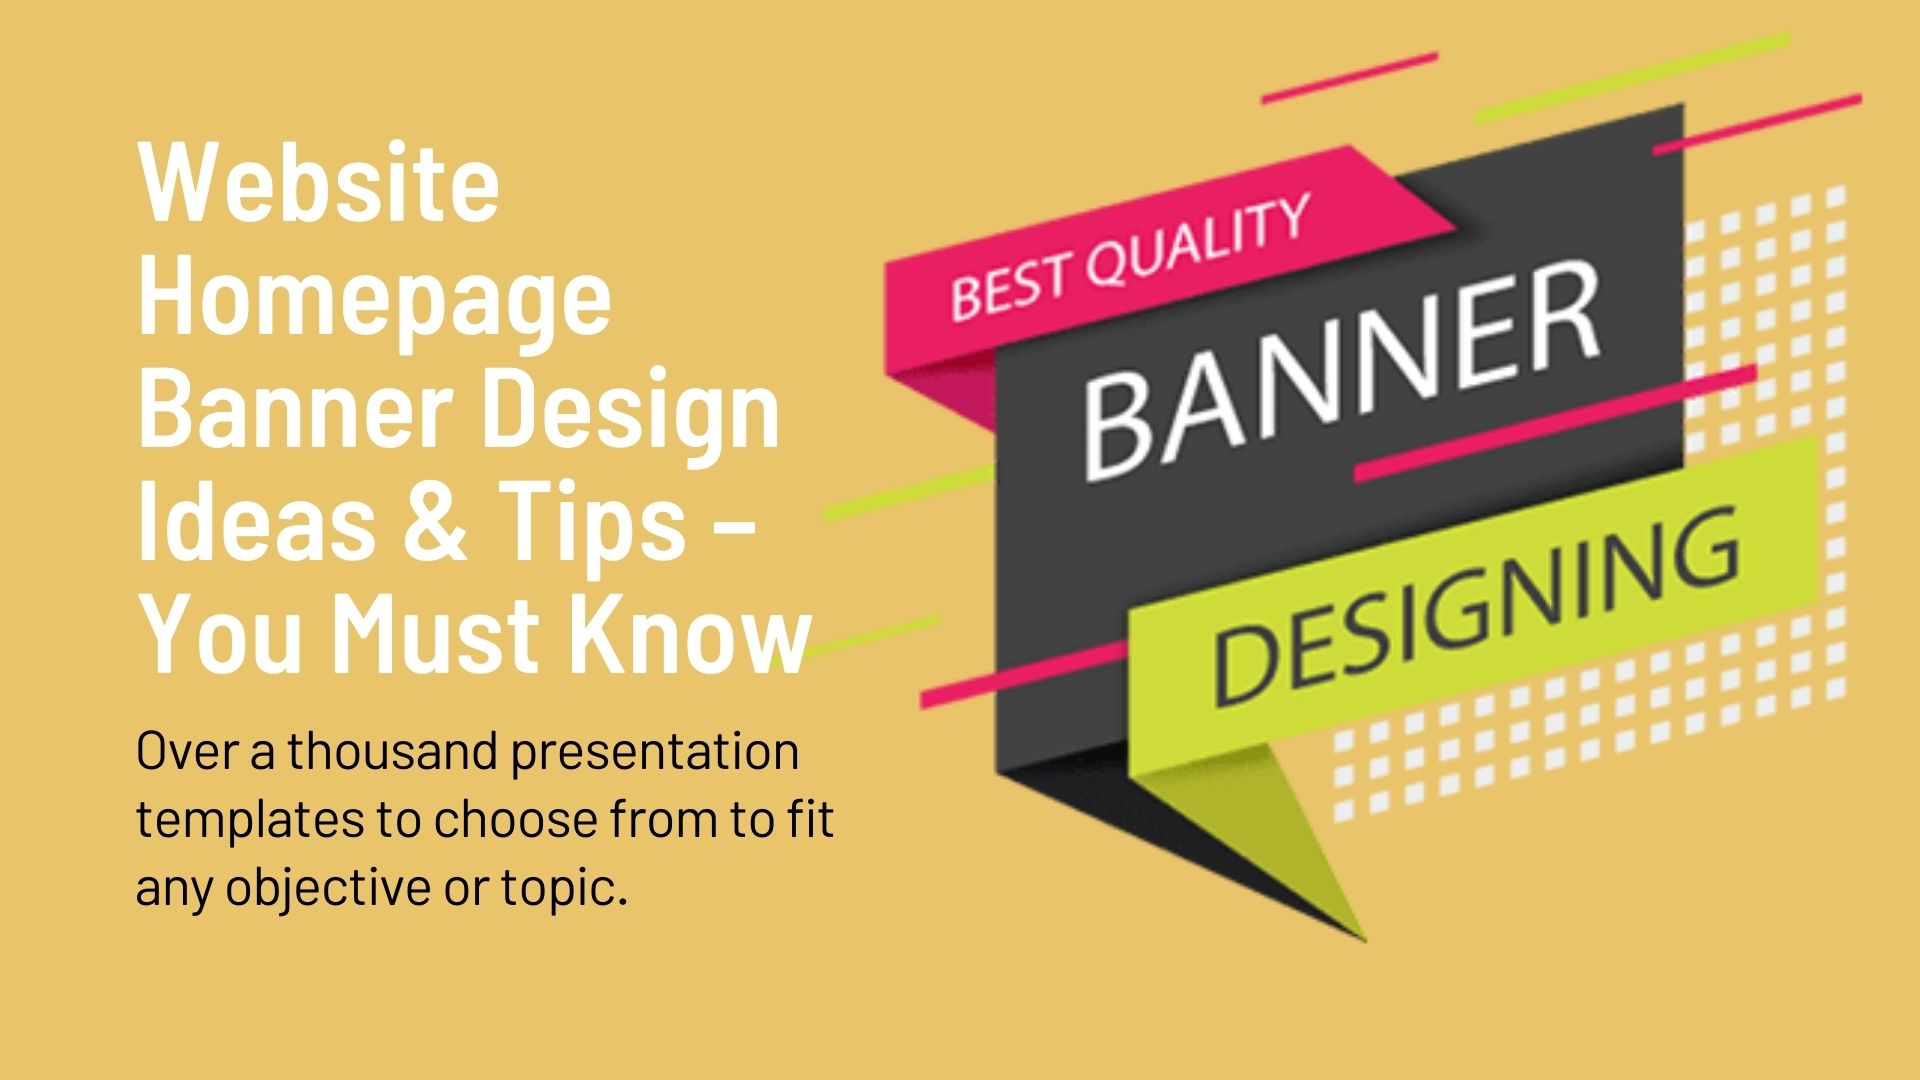 Website Homepage Banner Design Ideas & Tips – You Must Know